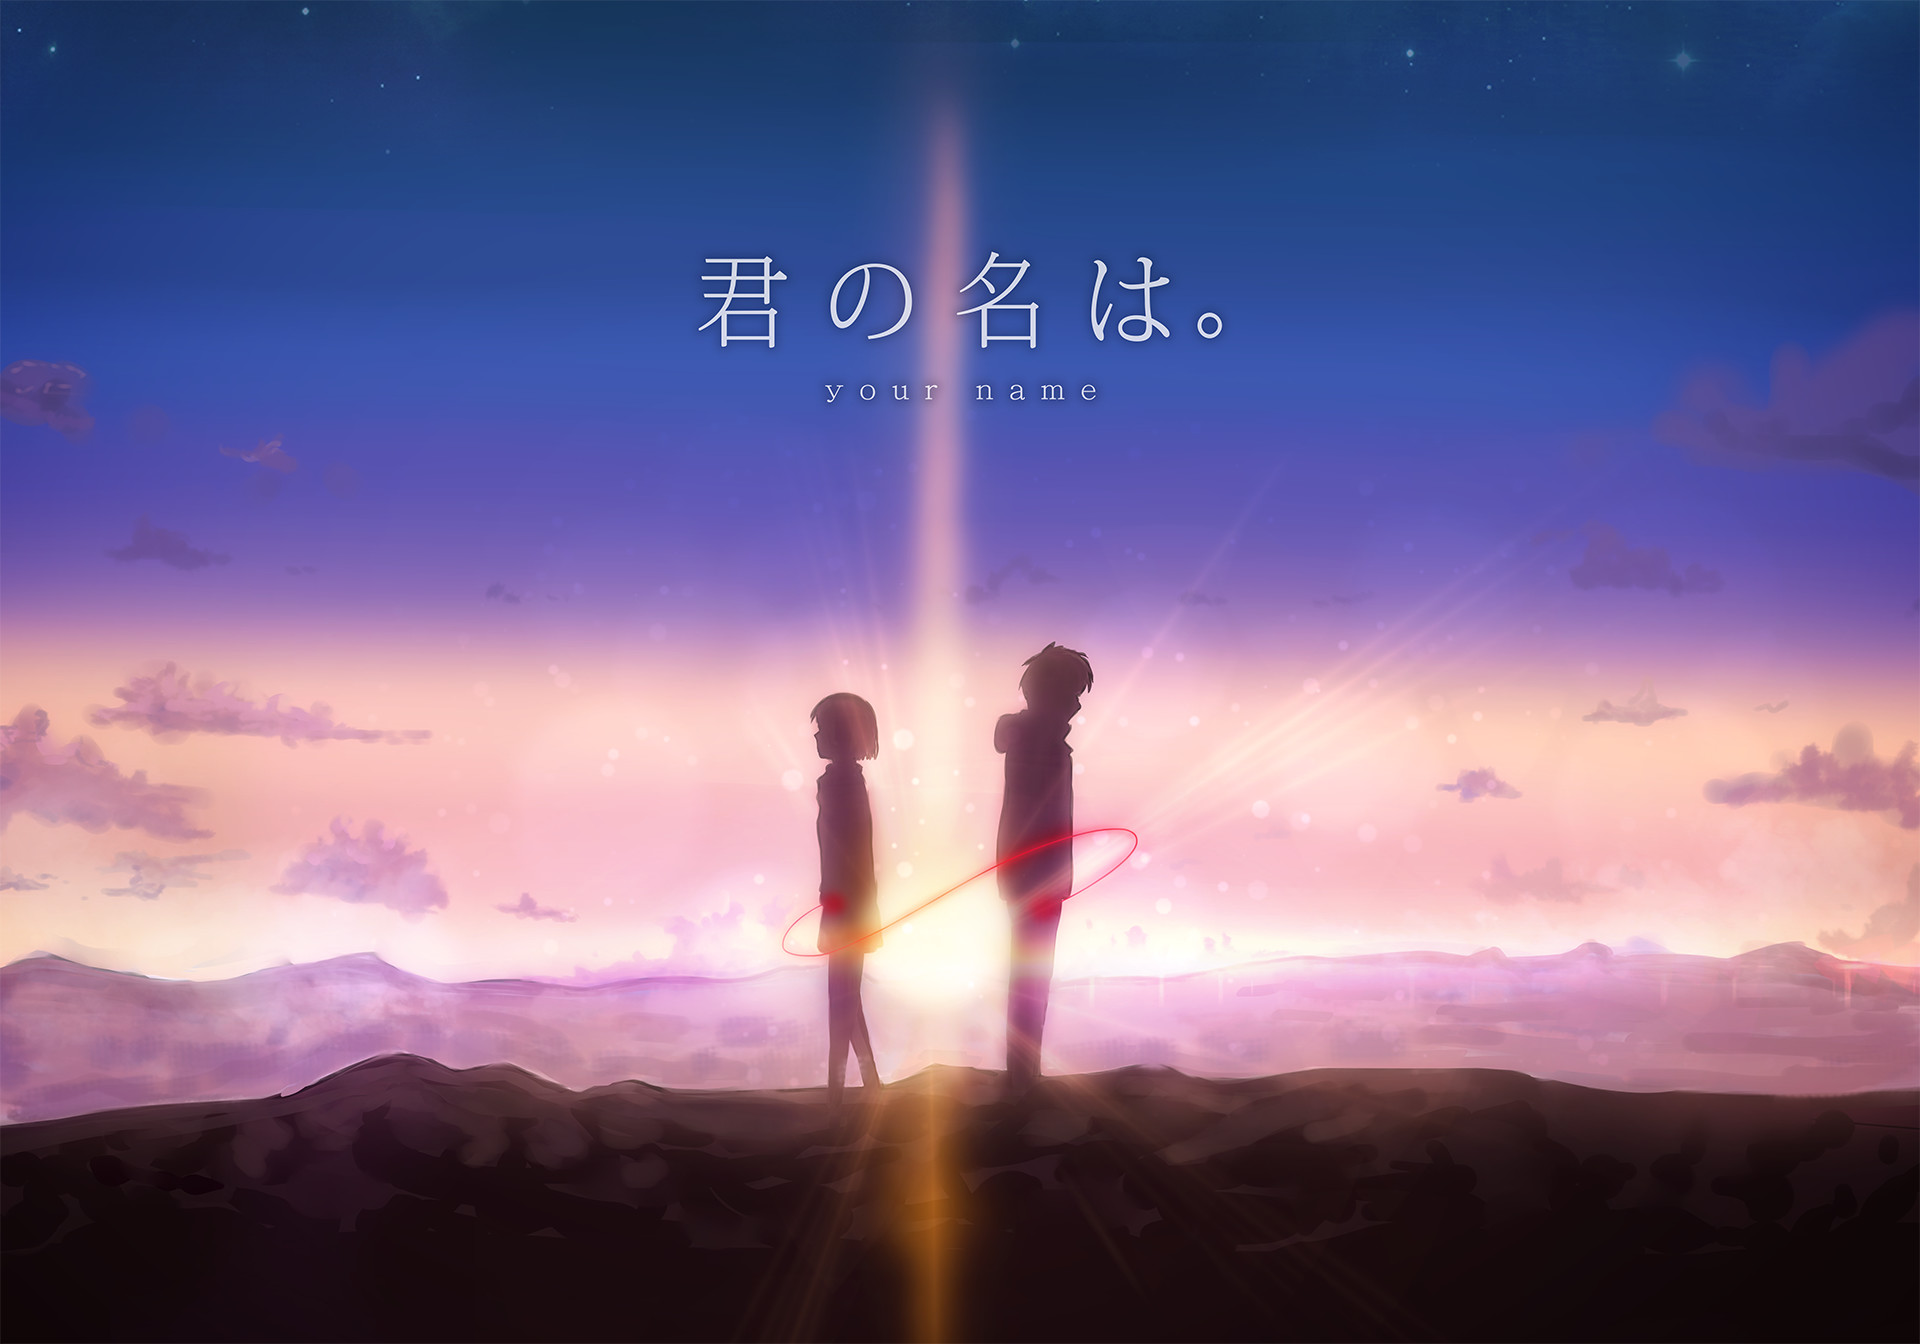 Wallpaper Hd - Your Name Anime Wallpapers Hd - 1920x1344 Wallpaper -  